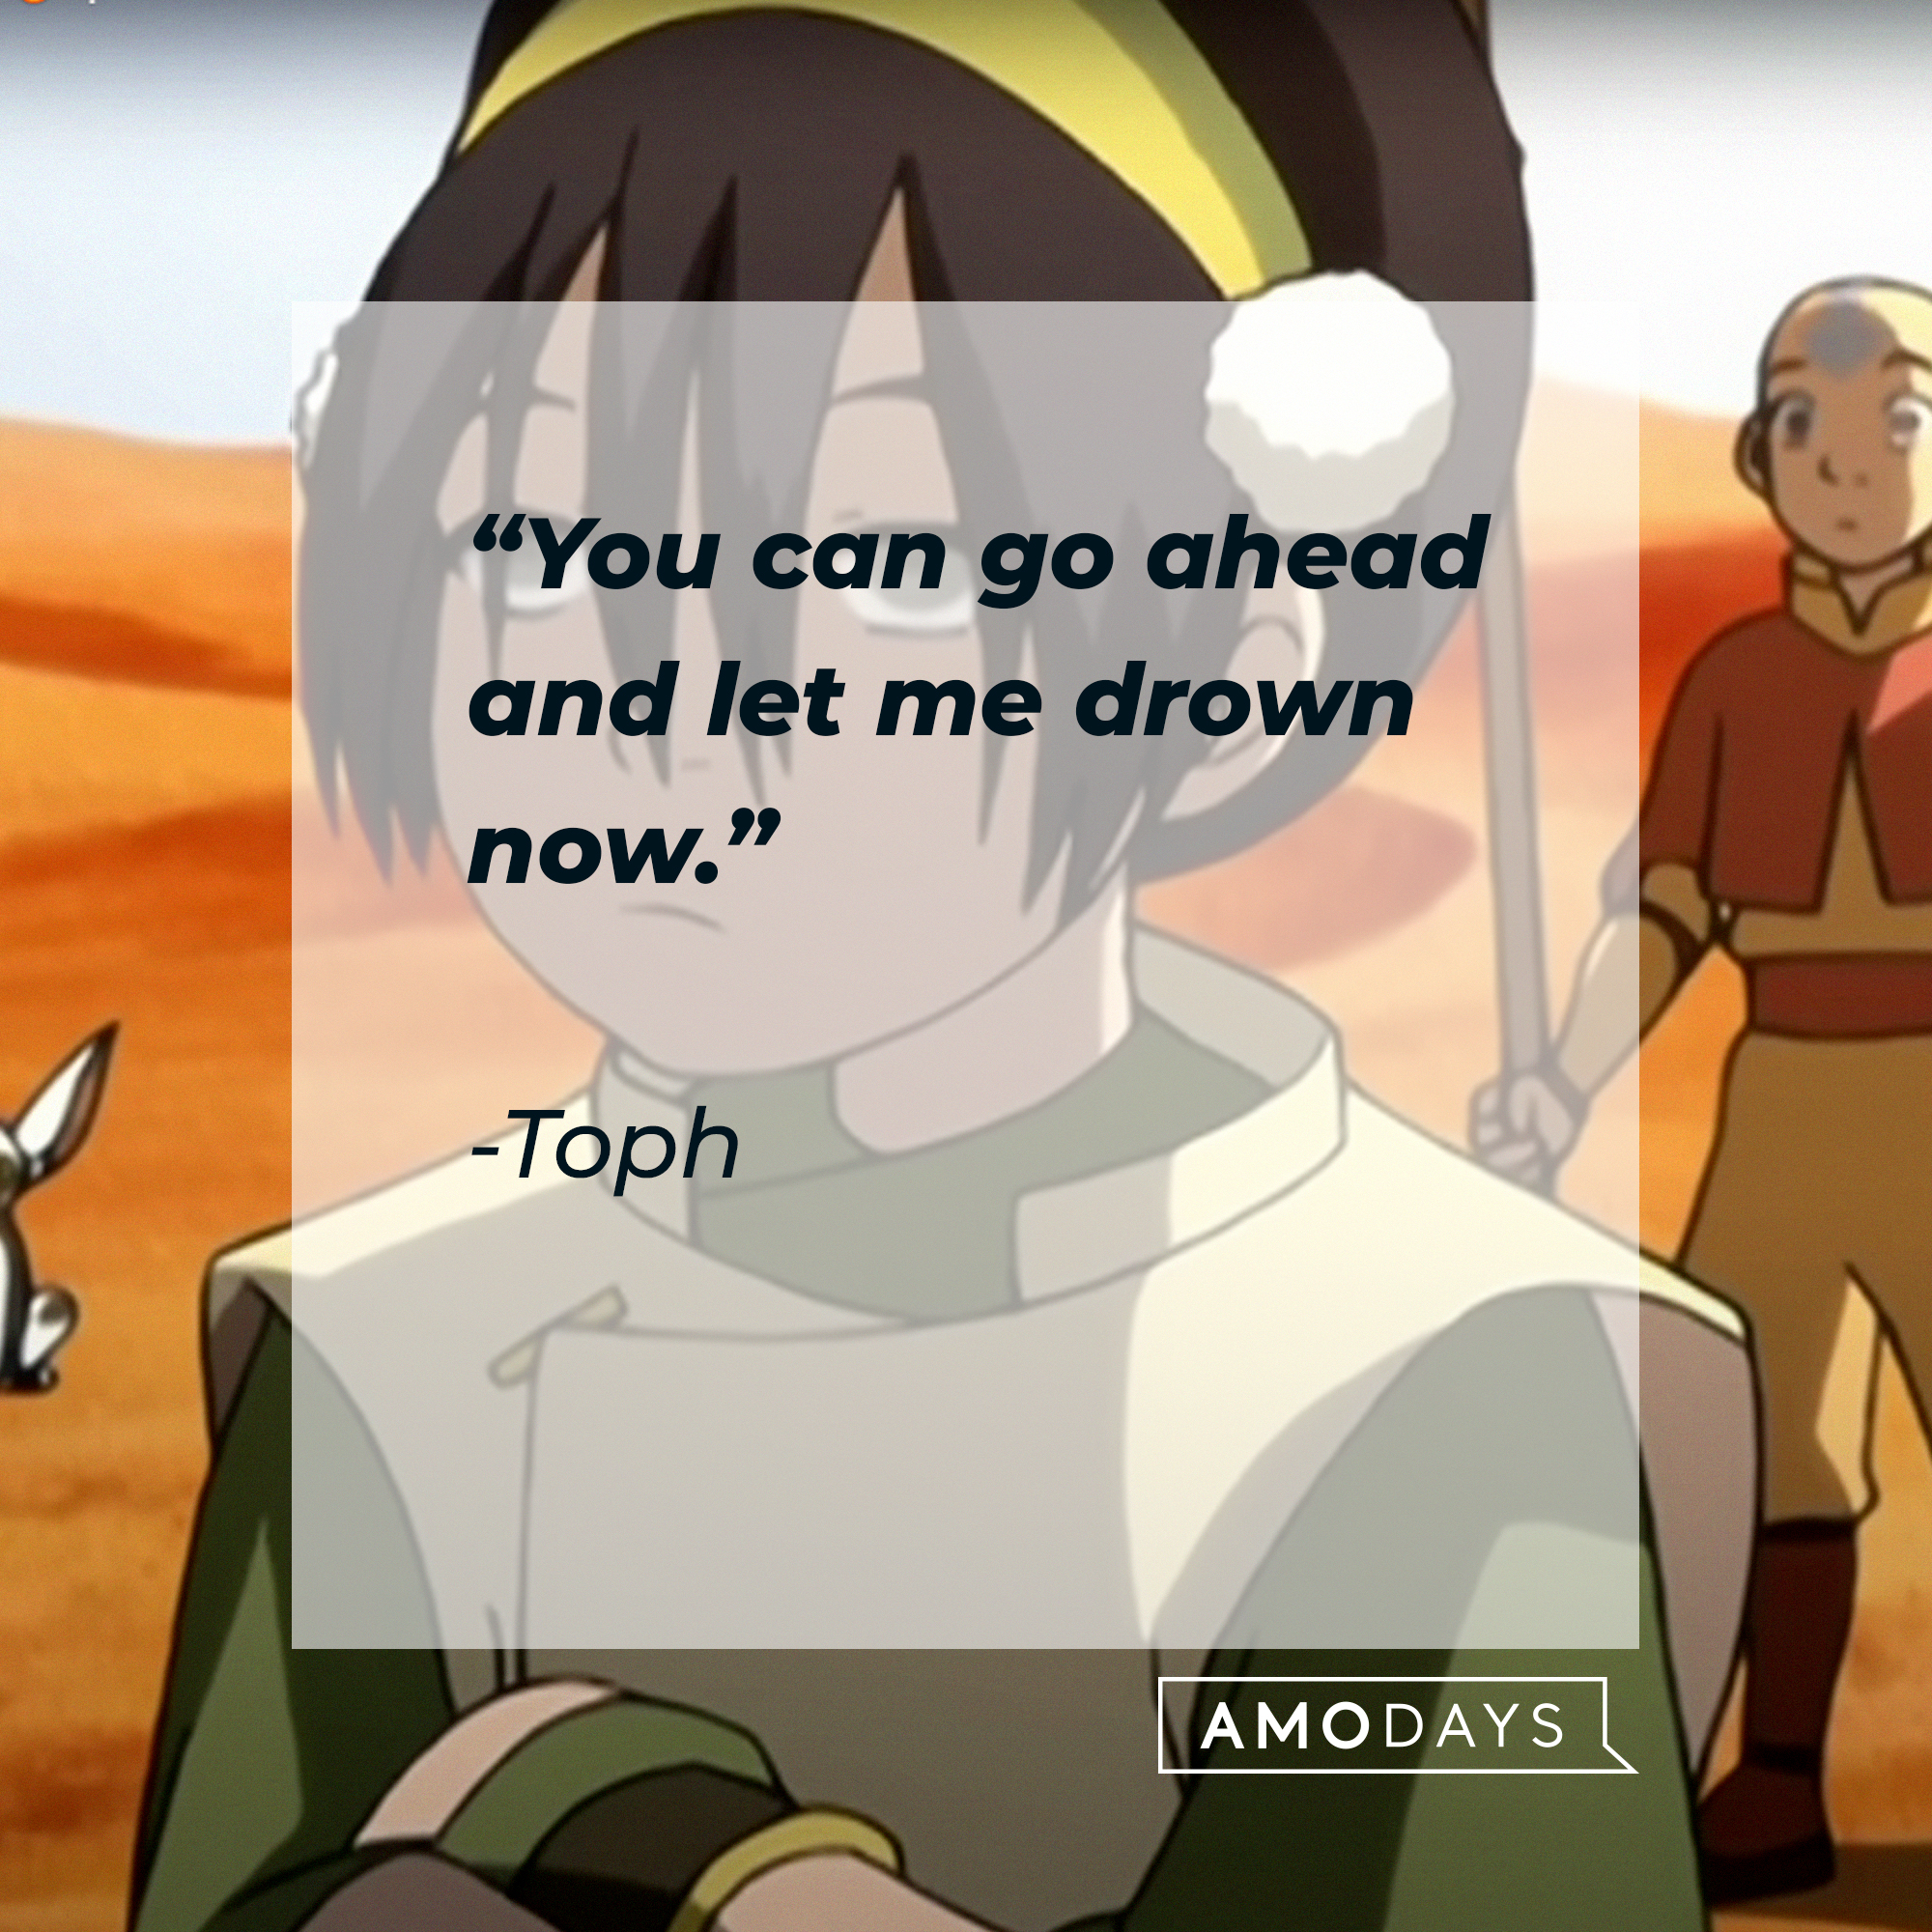 Toph, with her quote:  "You can go ahead and let me drown now." | Source: Youtube.com/TeamAvatar